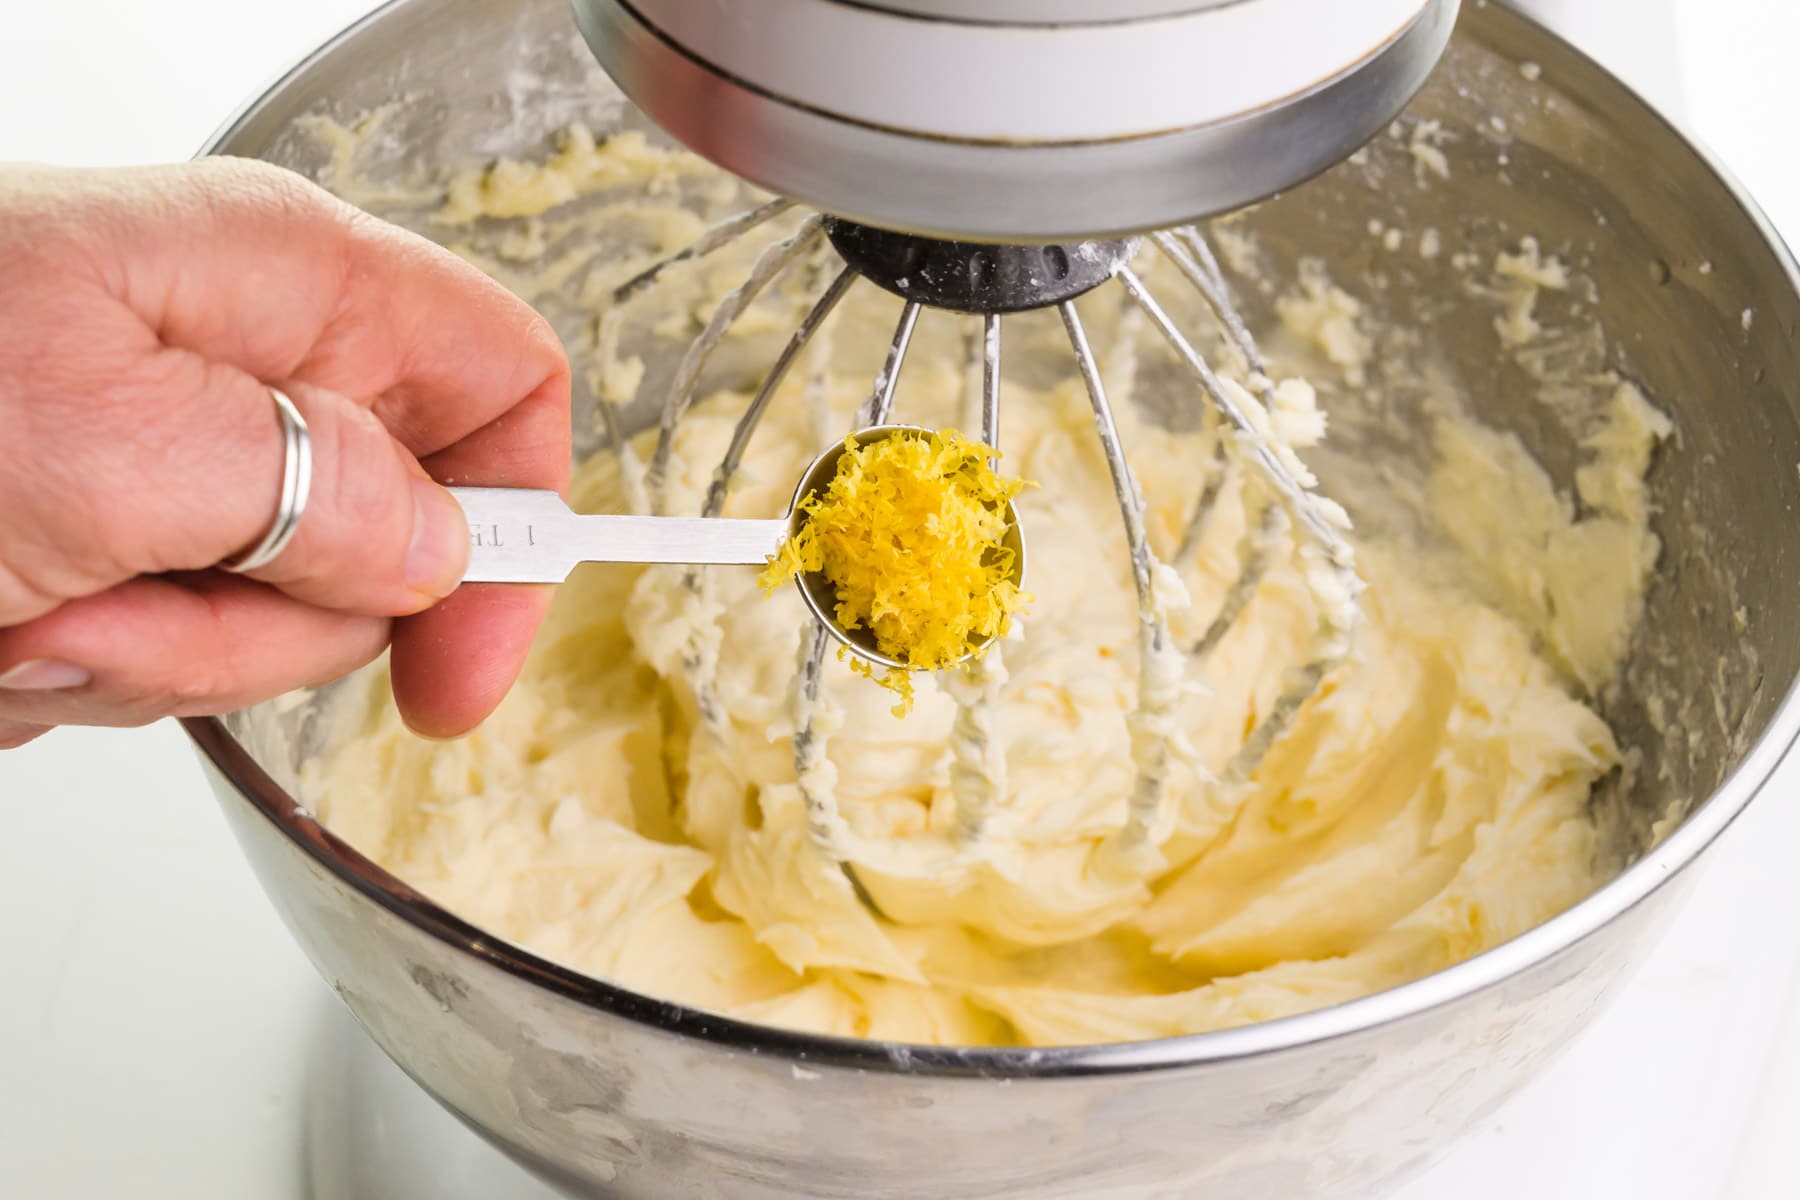 A hand holds a measuring spoon with lemon zest, pouring it into a stand mixer with whipped butter.